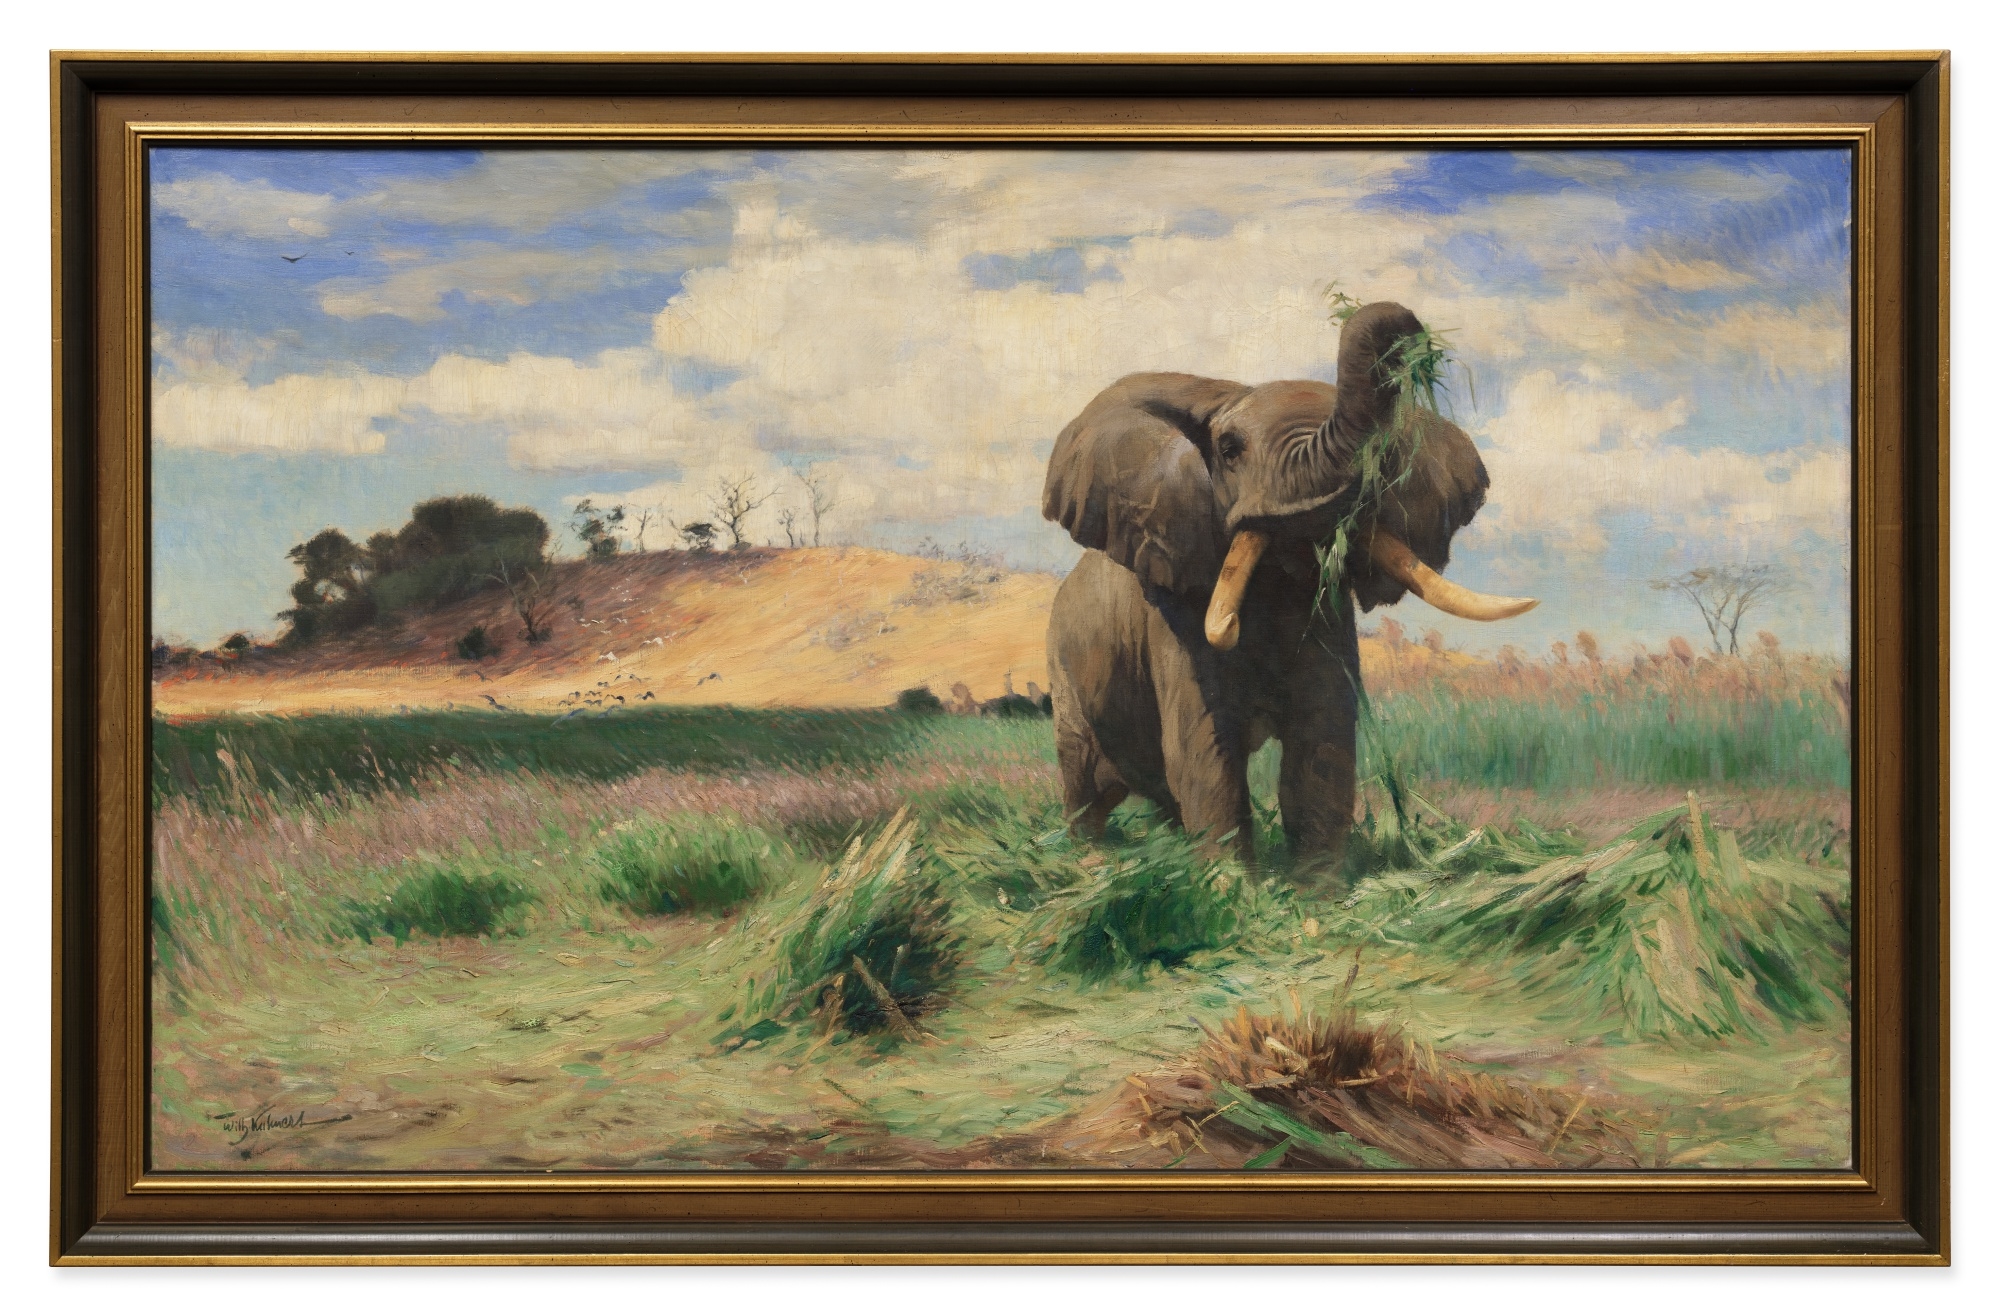 Artwork by Wilhelm Kuhnert, African Elephant in the Marshland, Made of oil on canvas